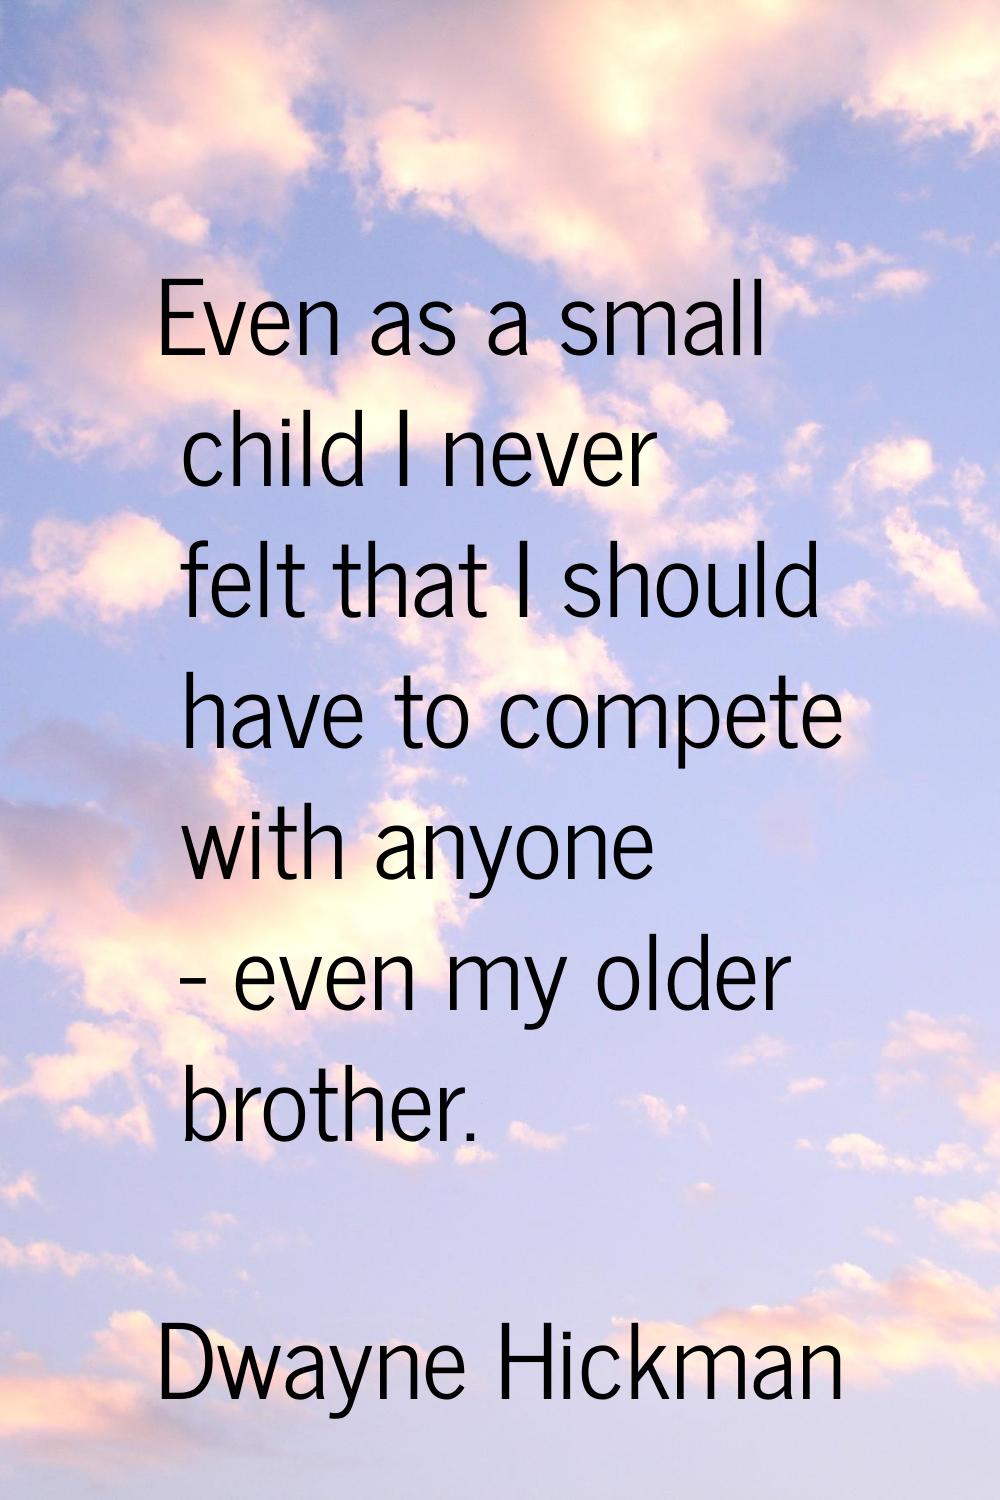 Even as a small child I never felt that I should have to compete with anyone - even my older brothe